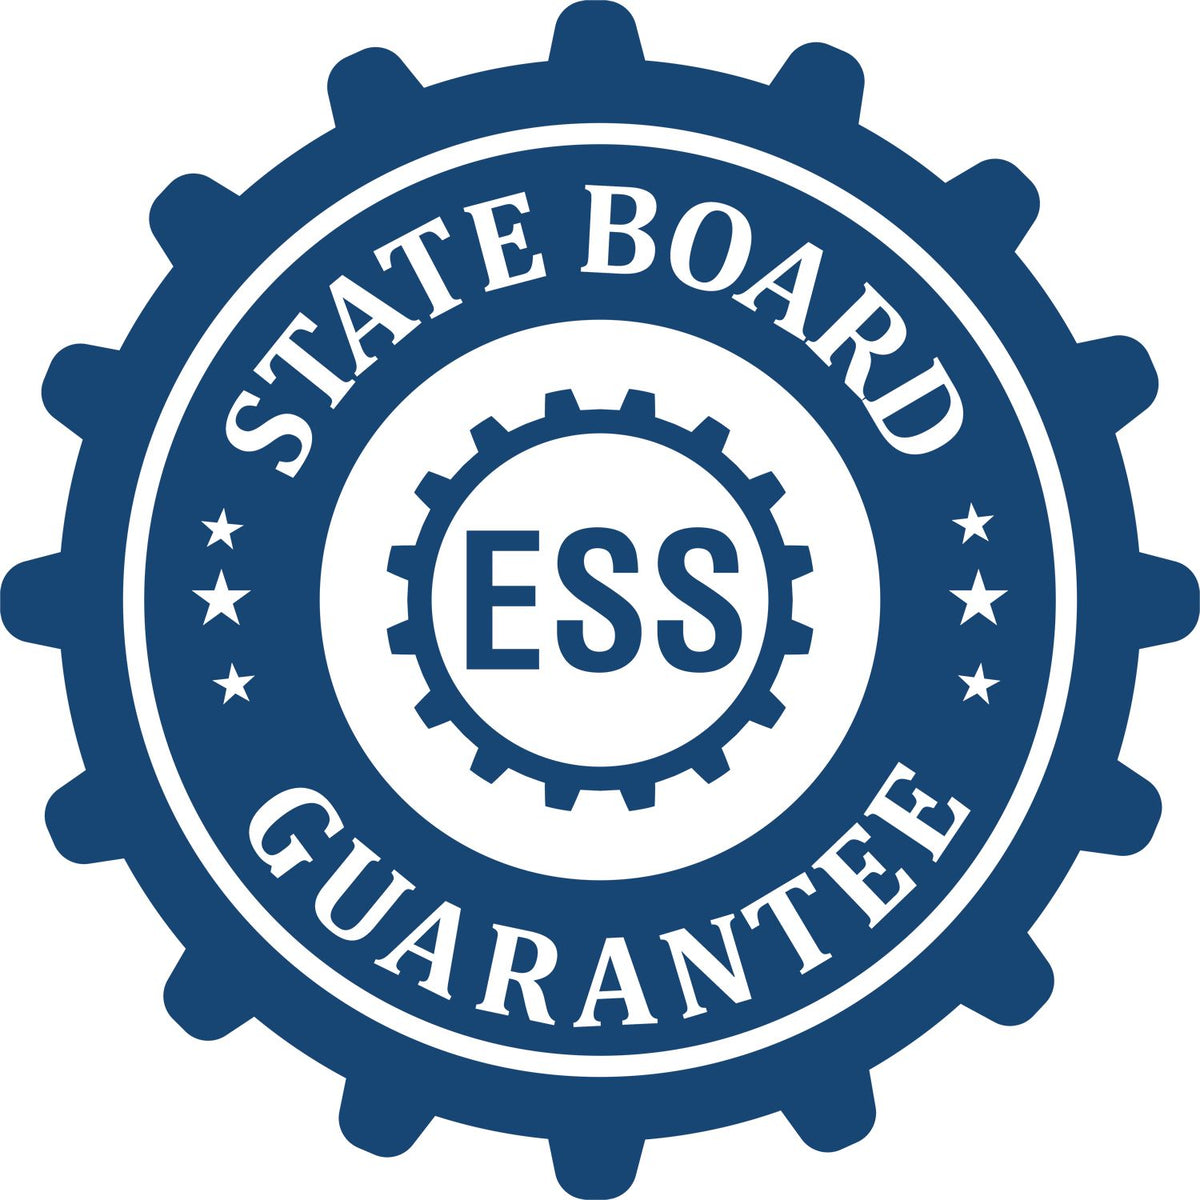 An emblem in a gear shape illustrating a state board guarantee for the Hybrid Connecticut Architect Seal